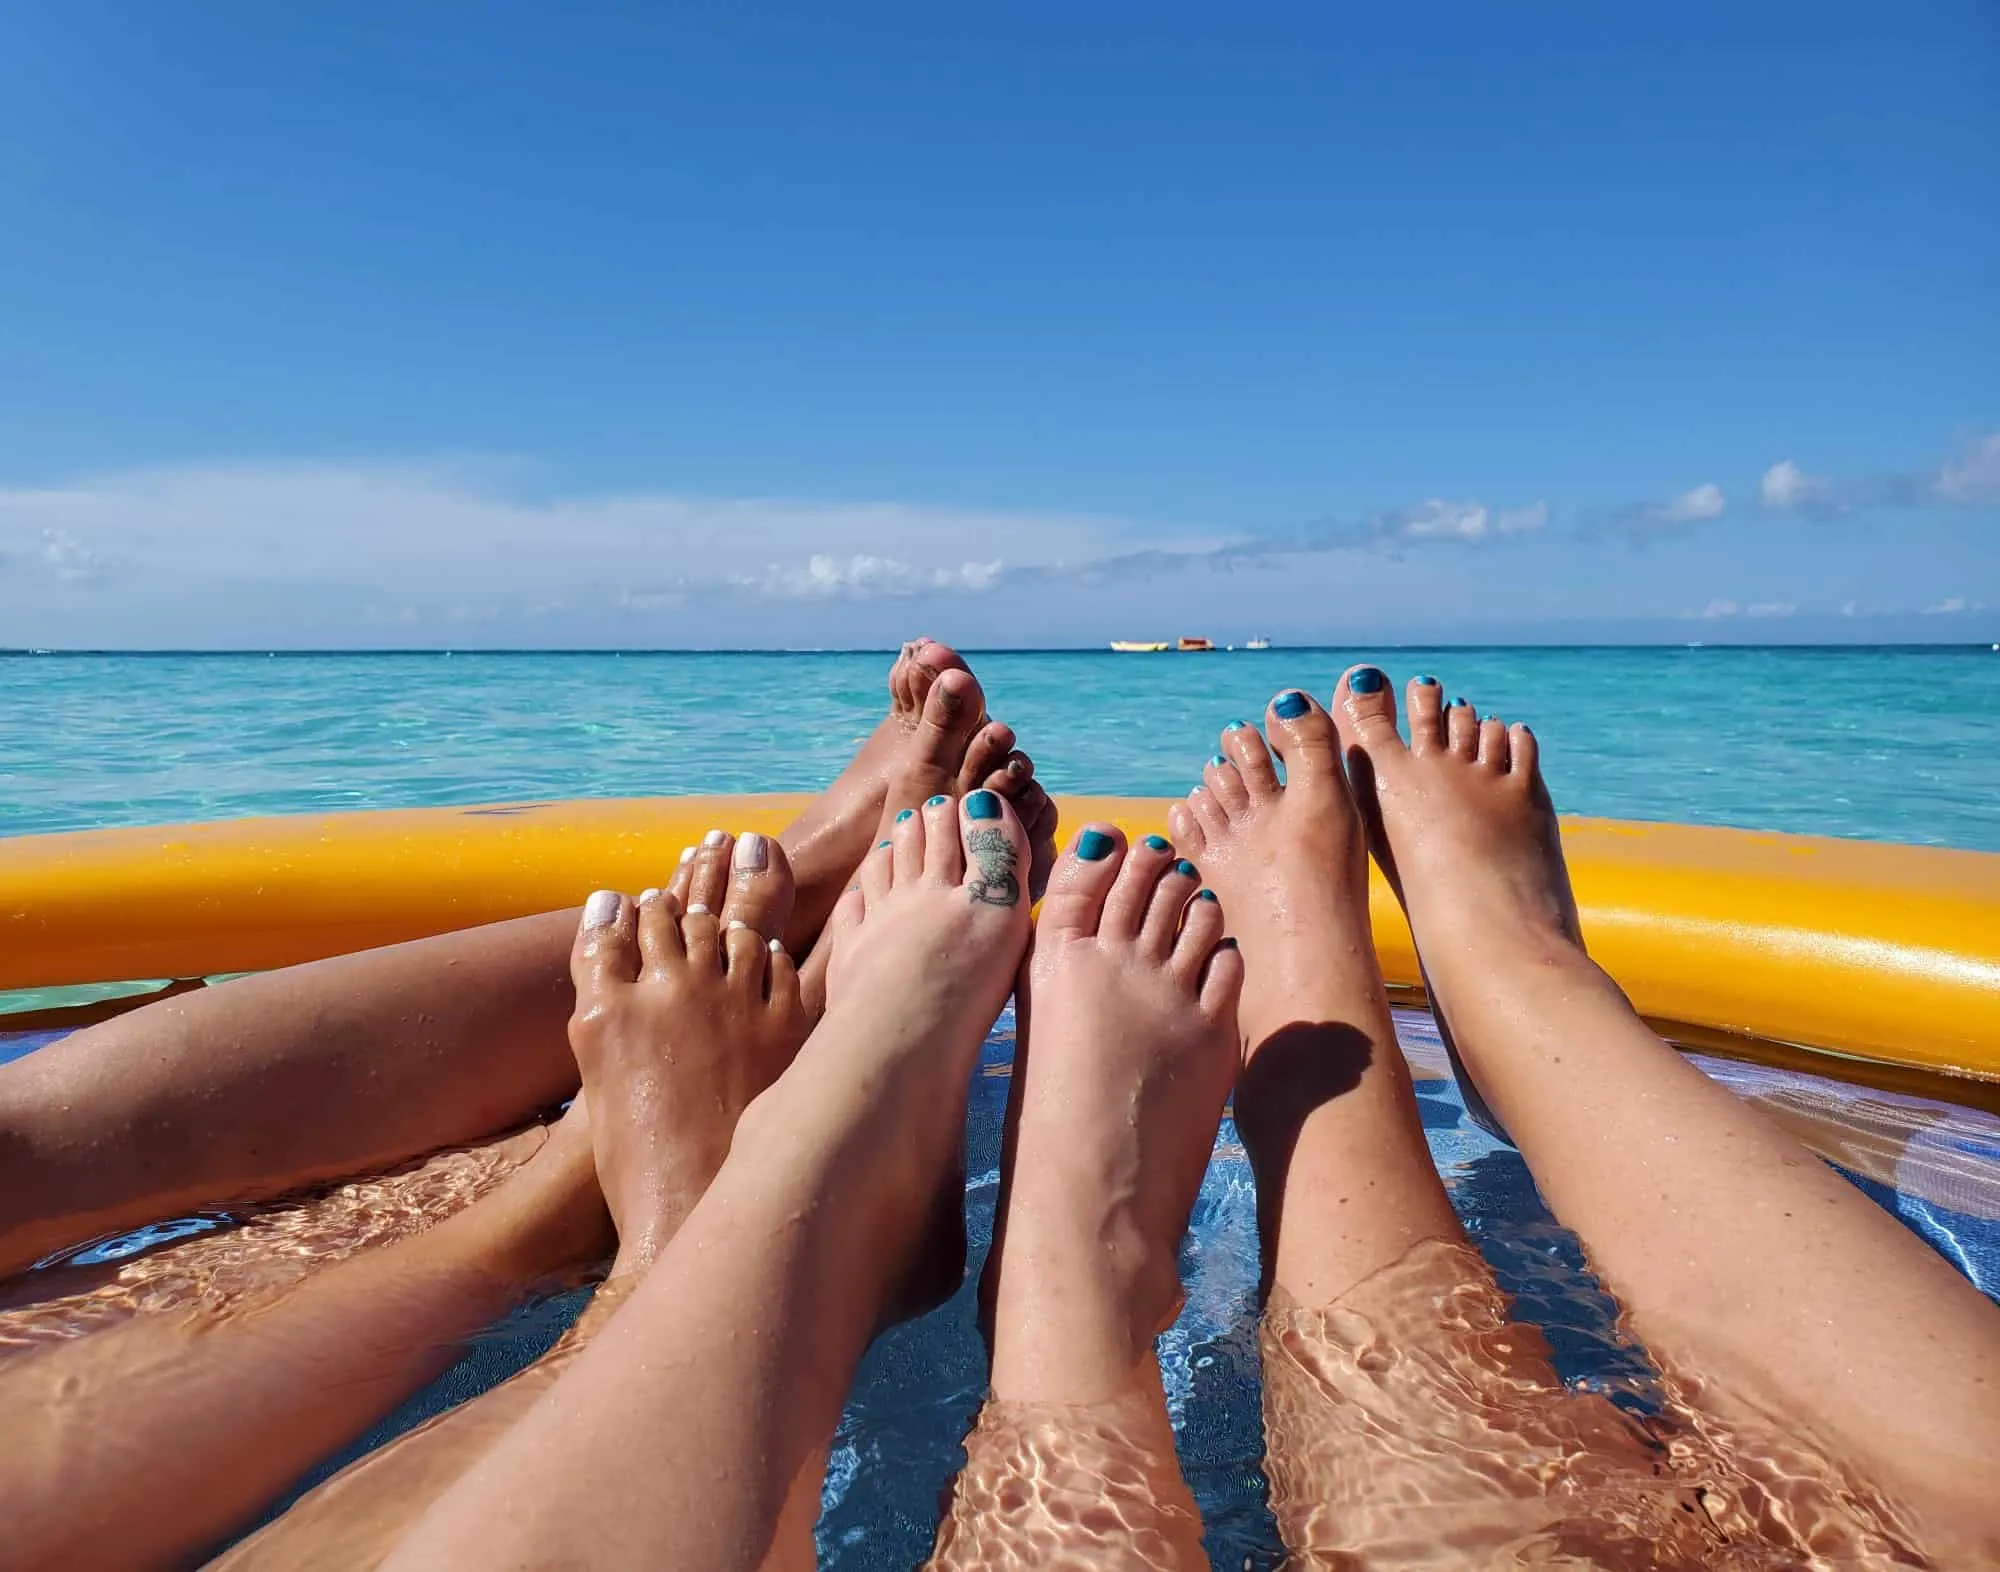 Women's legs and toes in a float in the ocean.